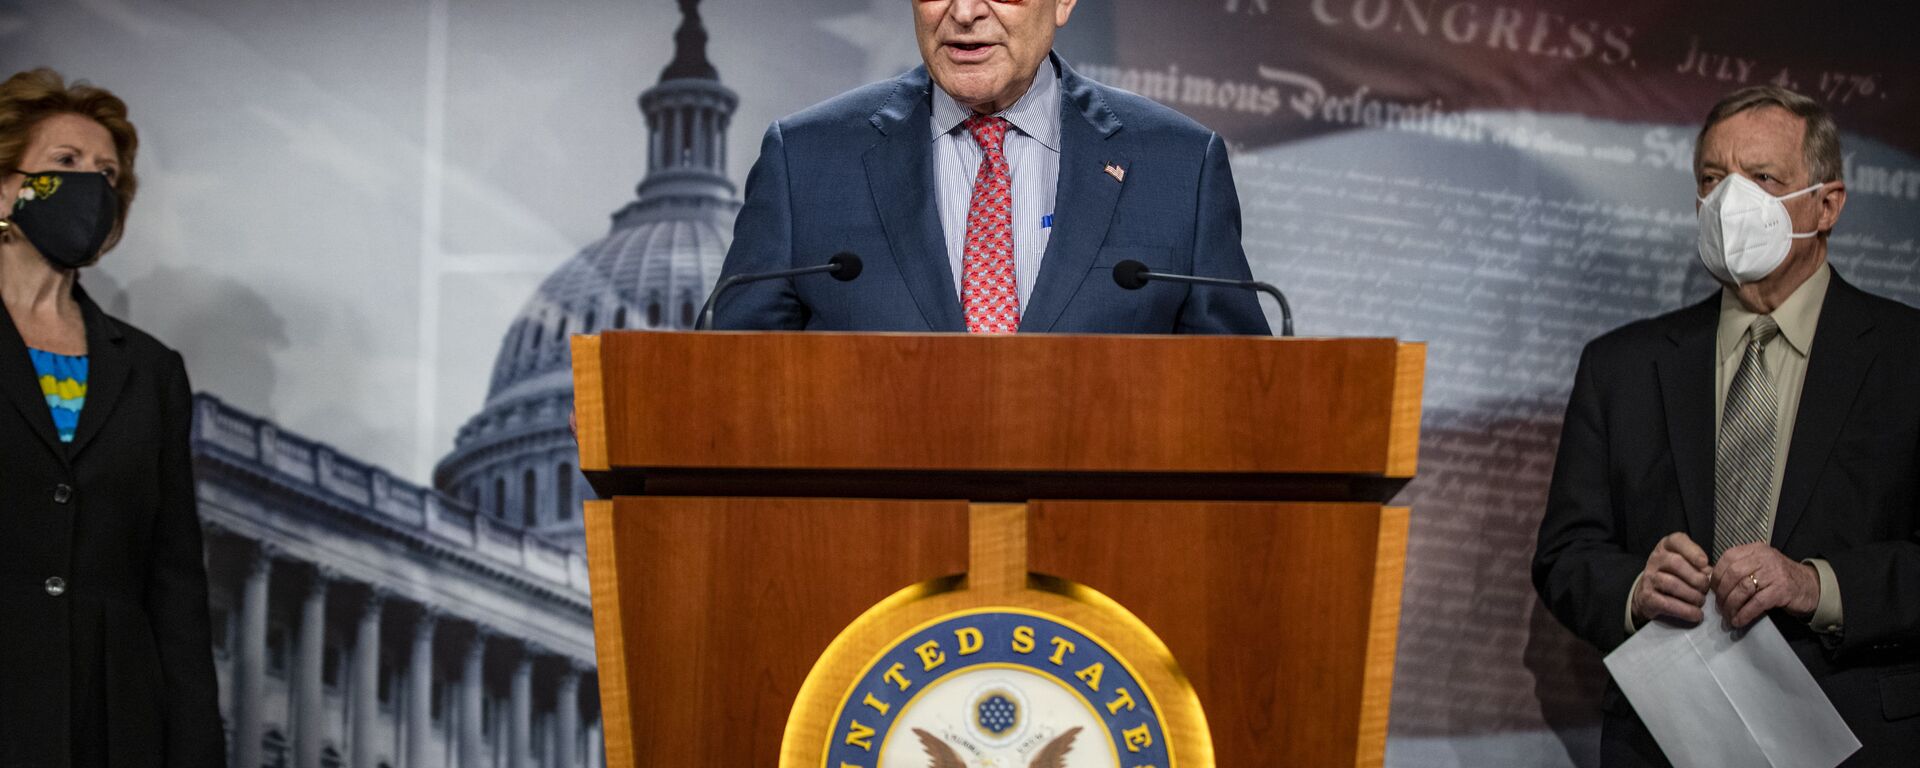 Senate Majority Leader Chuck Schumer, D-N.Y., speaks during a news conference at the Capitol in Washington, Tuesday, March 16, 2021.  - Sputnik International, 1920, 03.01.2022